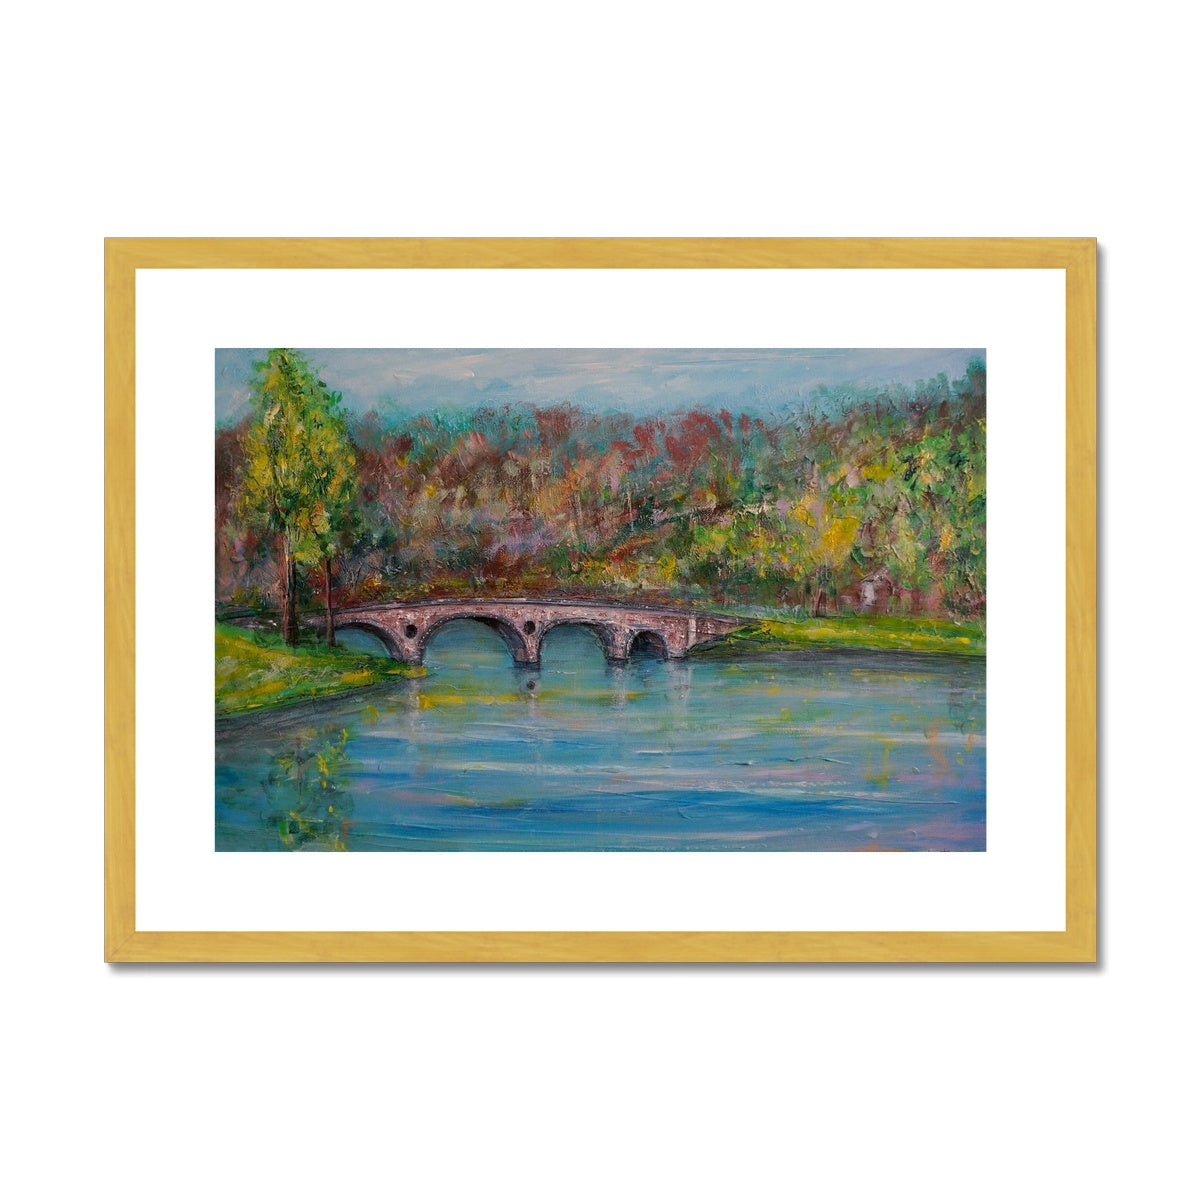 Kenmore Bridge Painting | Antique Framed & Mounted Prints From Scotland-Antique Framed & Mounted Prints-Scottish Highlands & Lowlands Art Gallery-A2 Landscape-Gold Frame-Paintings, Prints, Homeware, Art Gifts From Scotland By Scottish Artist Kevin Hunter